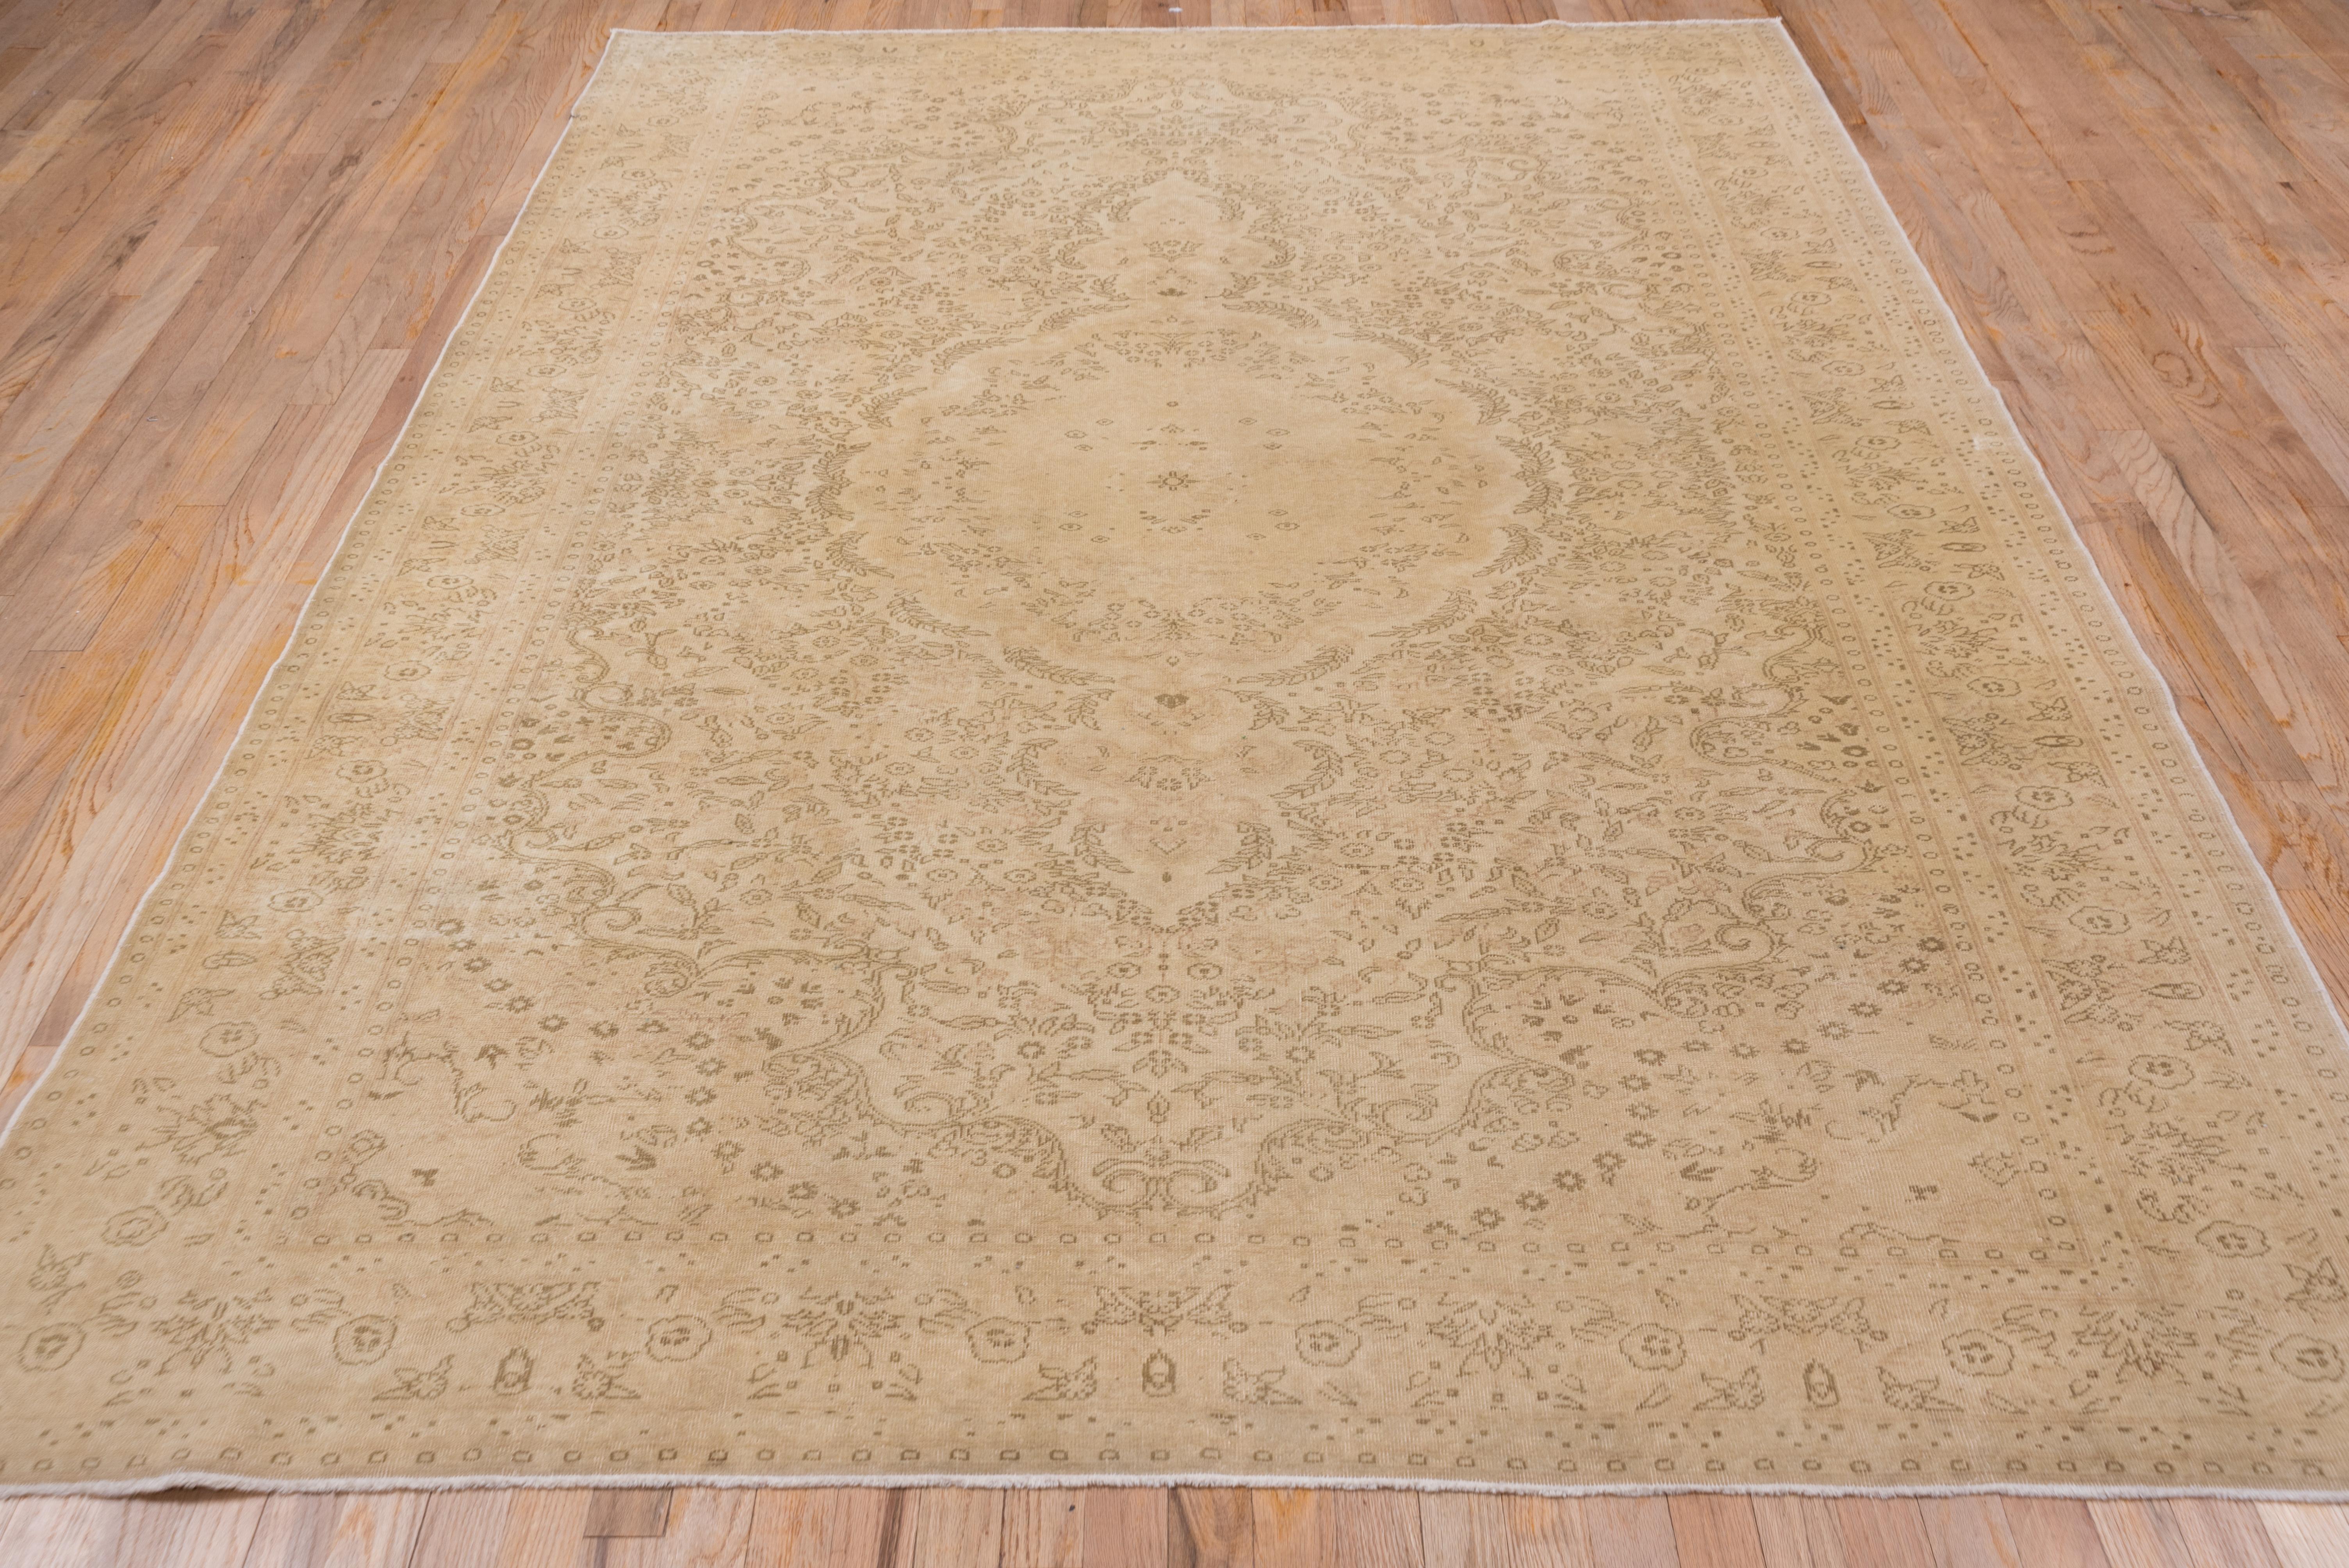 This moderately finely woven eastern Turkish town carpet has a curved laurel leaf segment outlined open center set with small leafy sprays and extended lobed and arabesque edged corners, all on a creamy ivory ground with light brown decor. The ivory